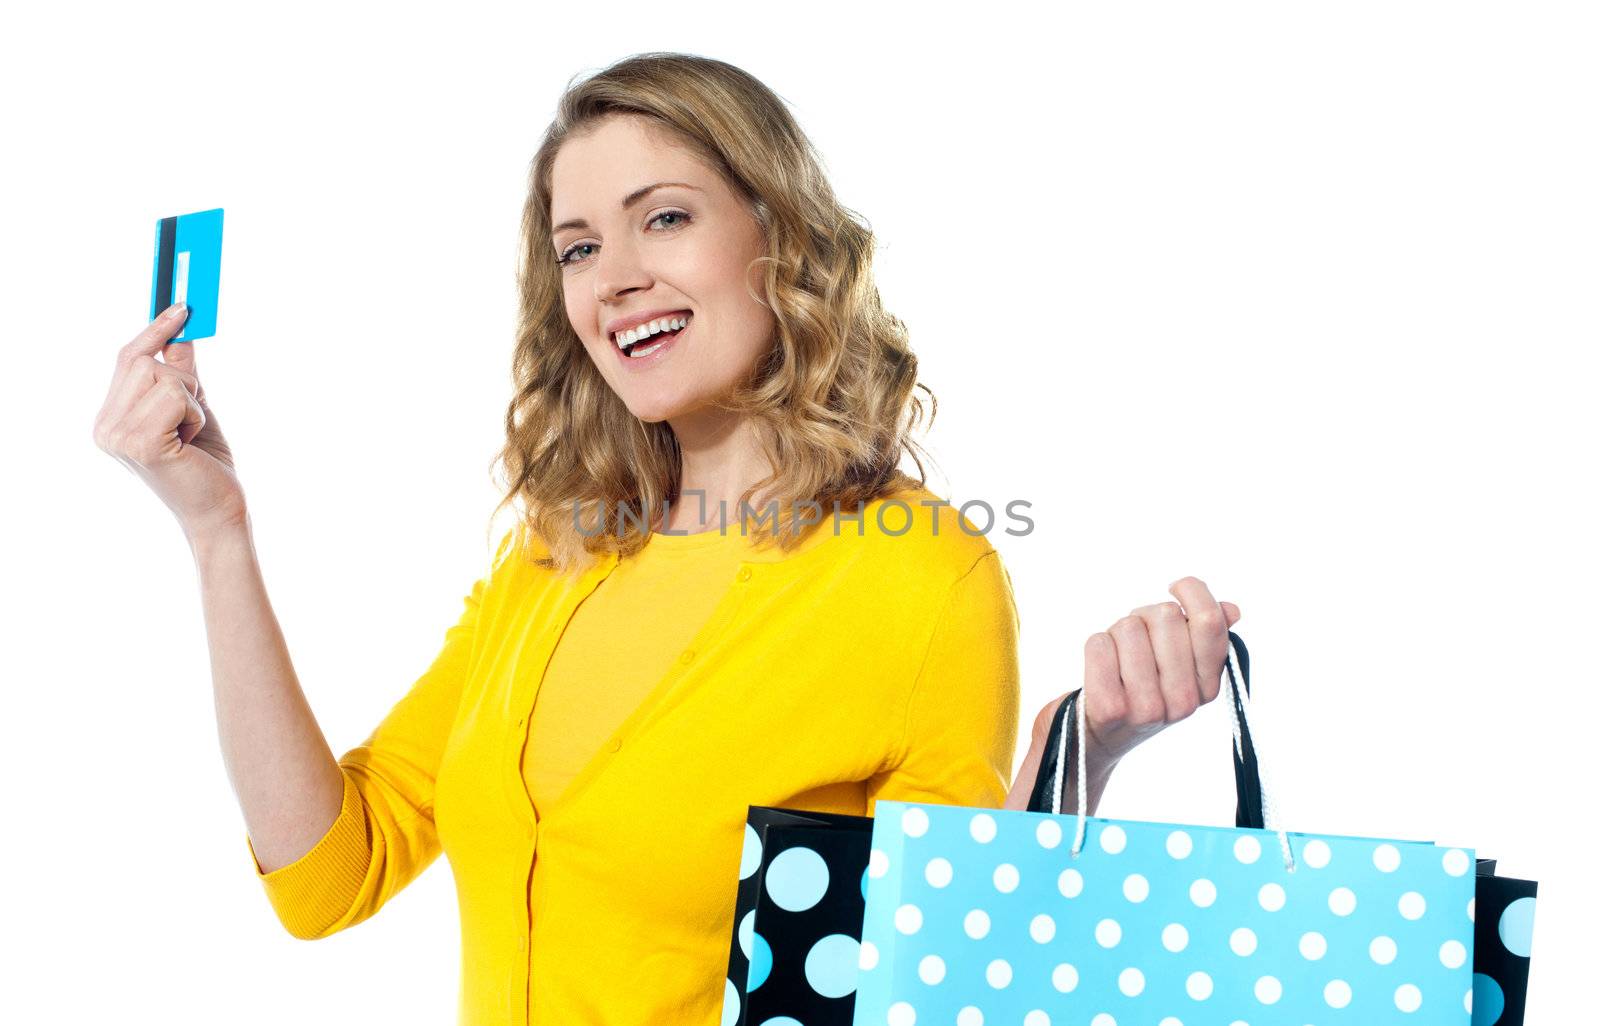 Attractive woman holding cerdit-card with shopping bags smiling against white background